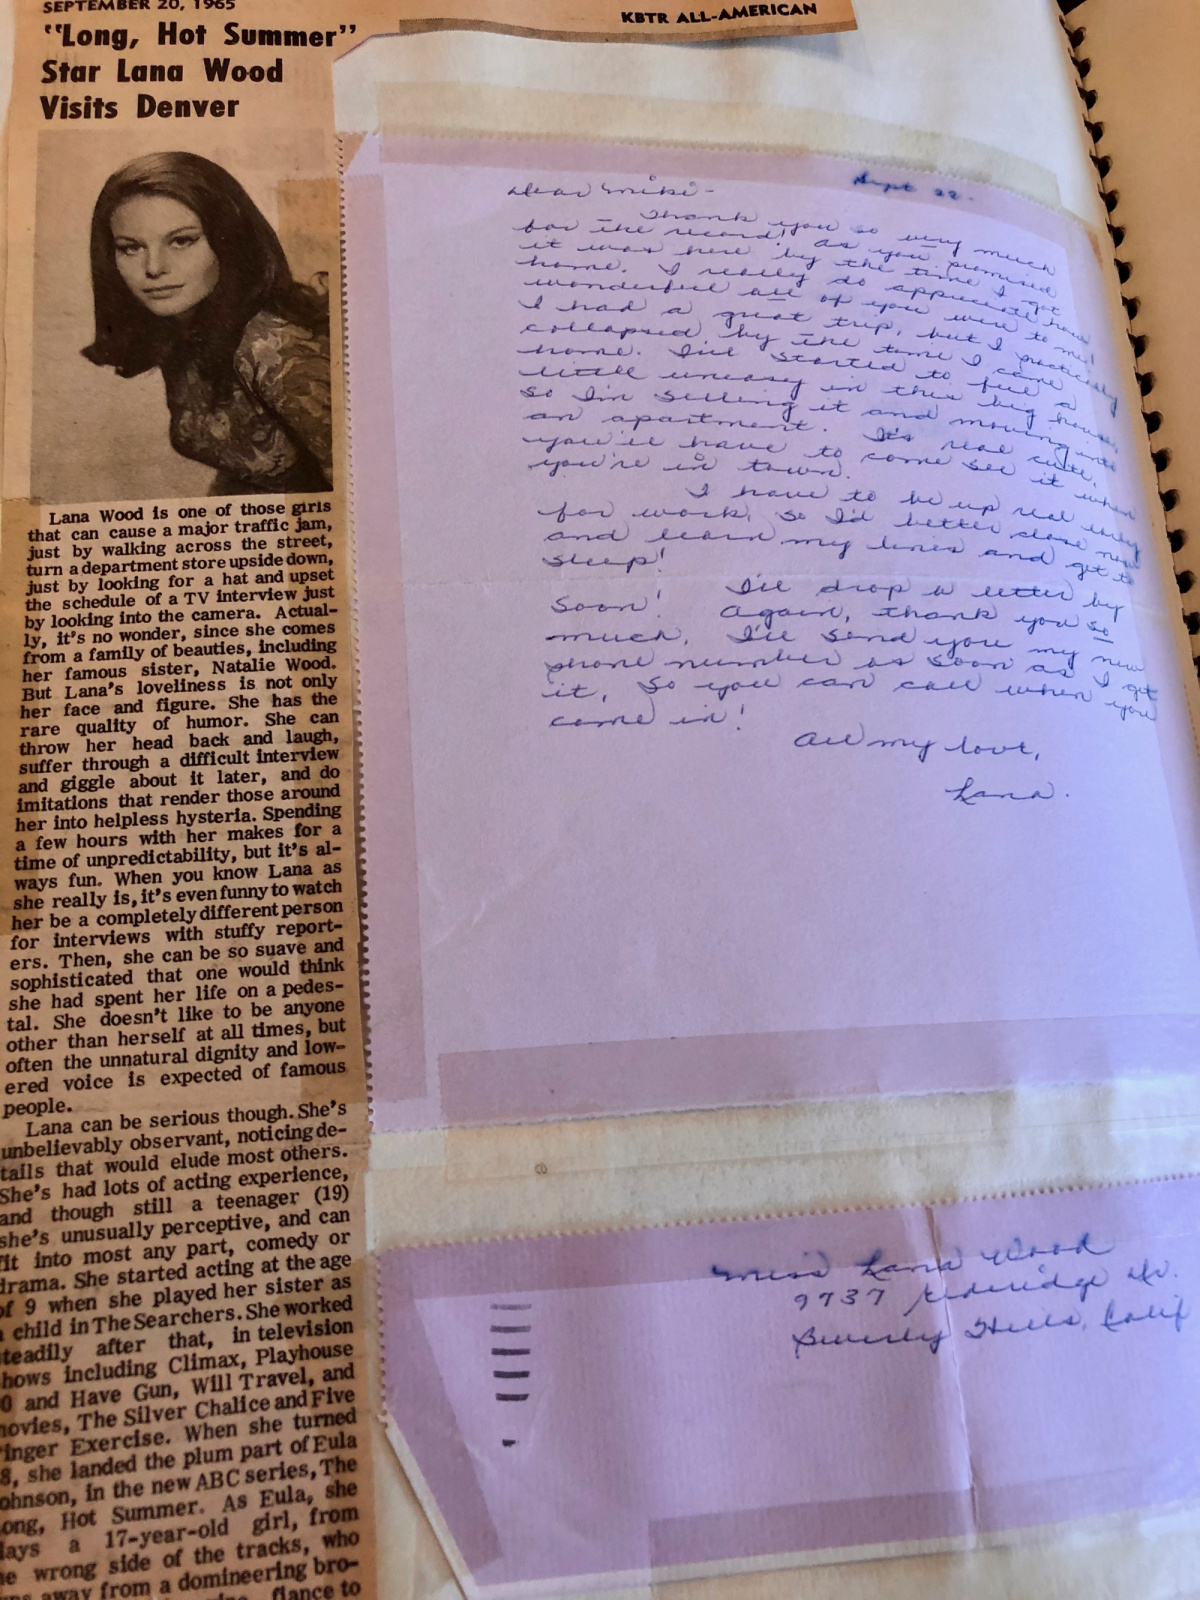 Thank you letter by Lana Wood, sister of NATALIE.  And she even put her address on the envelope!
